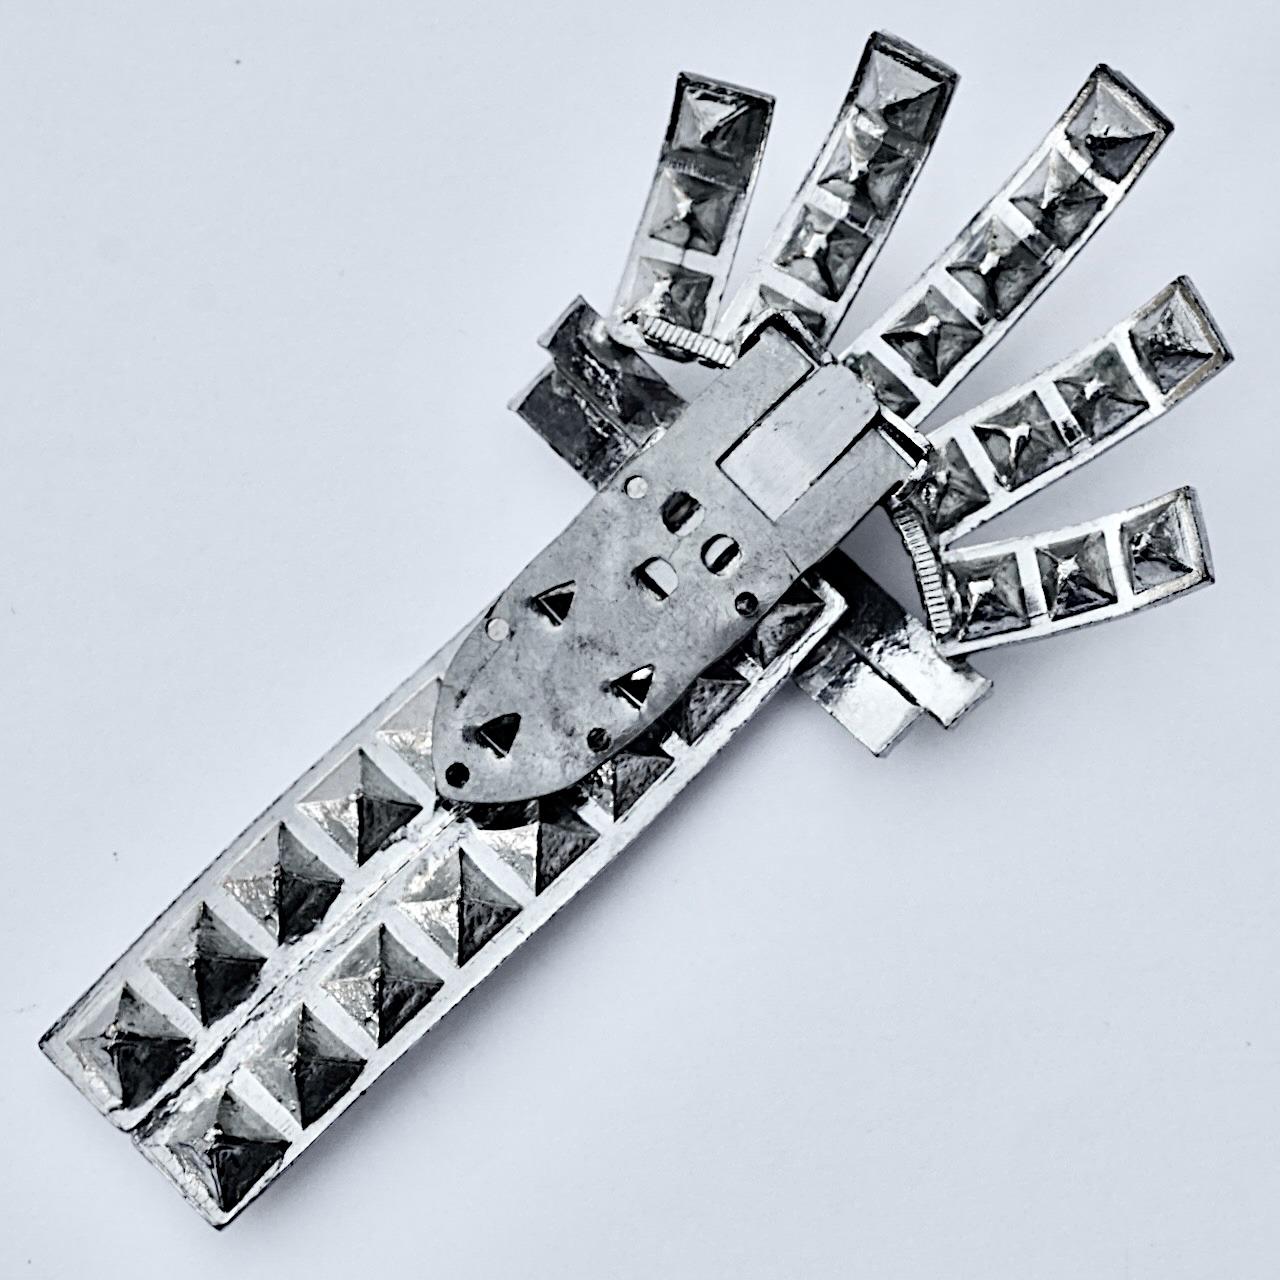 Fabulous large Art Deco dress clip set with beautiful faceted rhinestones. Measuring length 8.25 cm /  3.25 inches by width 4.25 cm / 1.67 inches. The dress clip is in very good condition, the clip works well.

This is a lovely statement dress clip